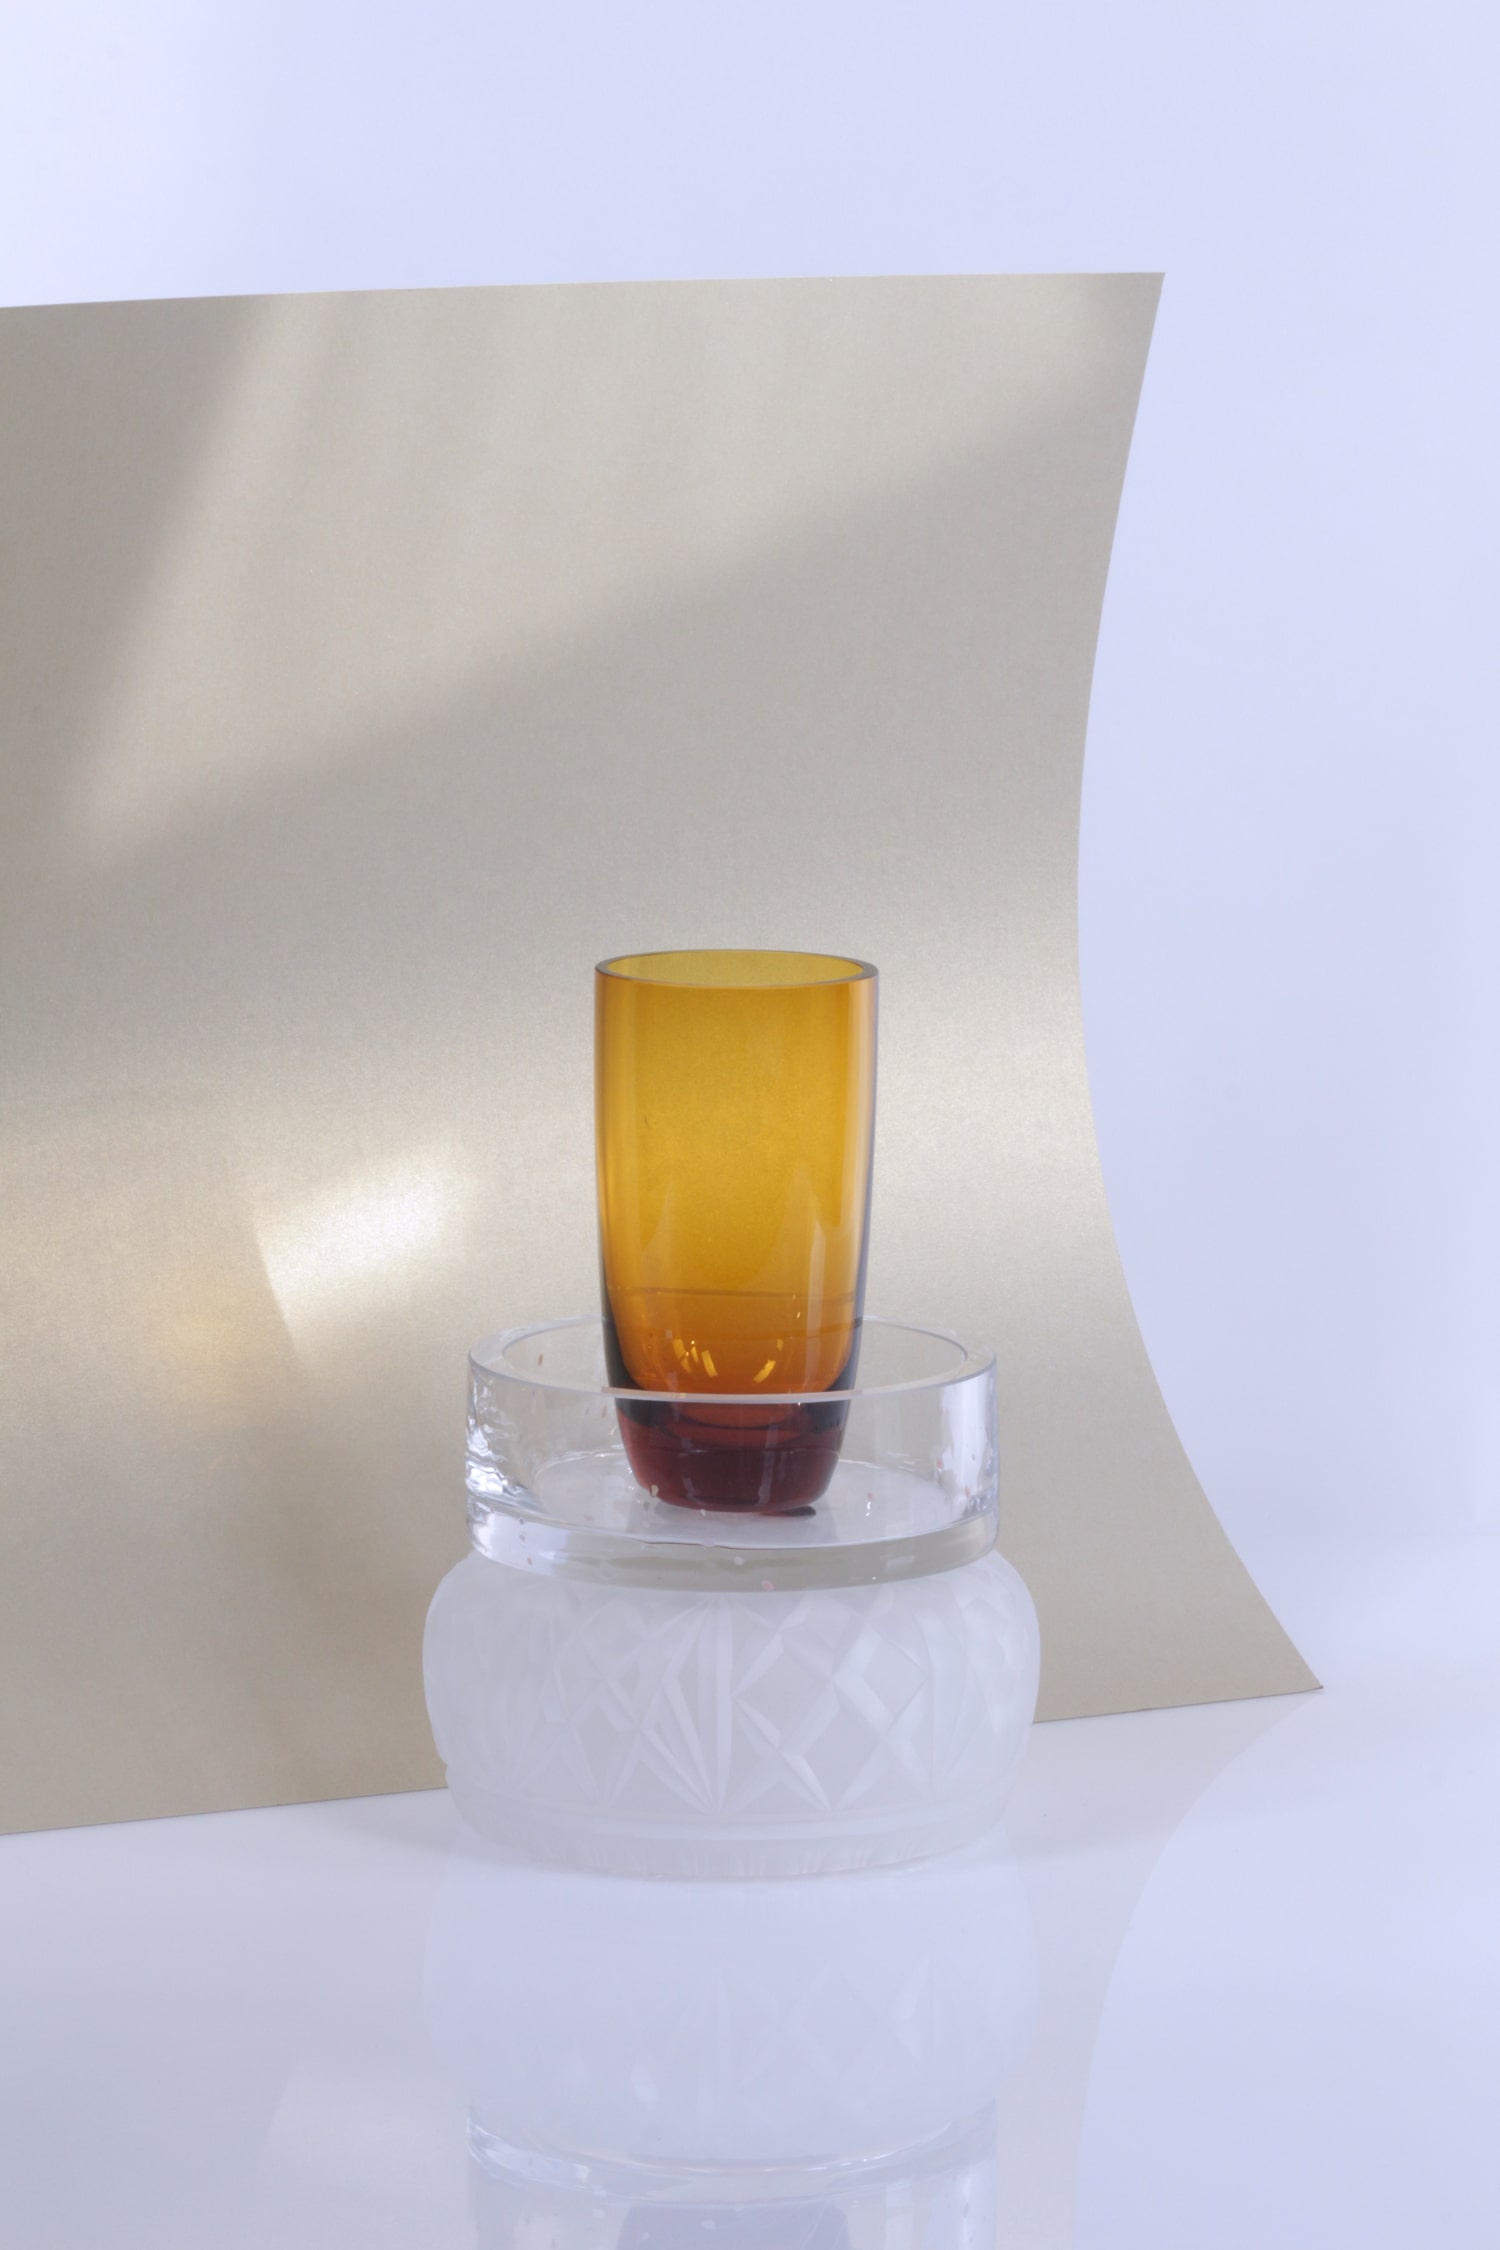 Lotus Symbols of now glass object from Heritage Contemporary collection design by Jiri Krejcirik 